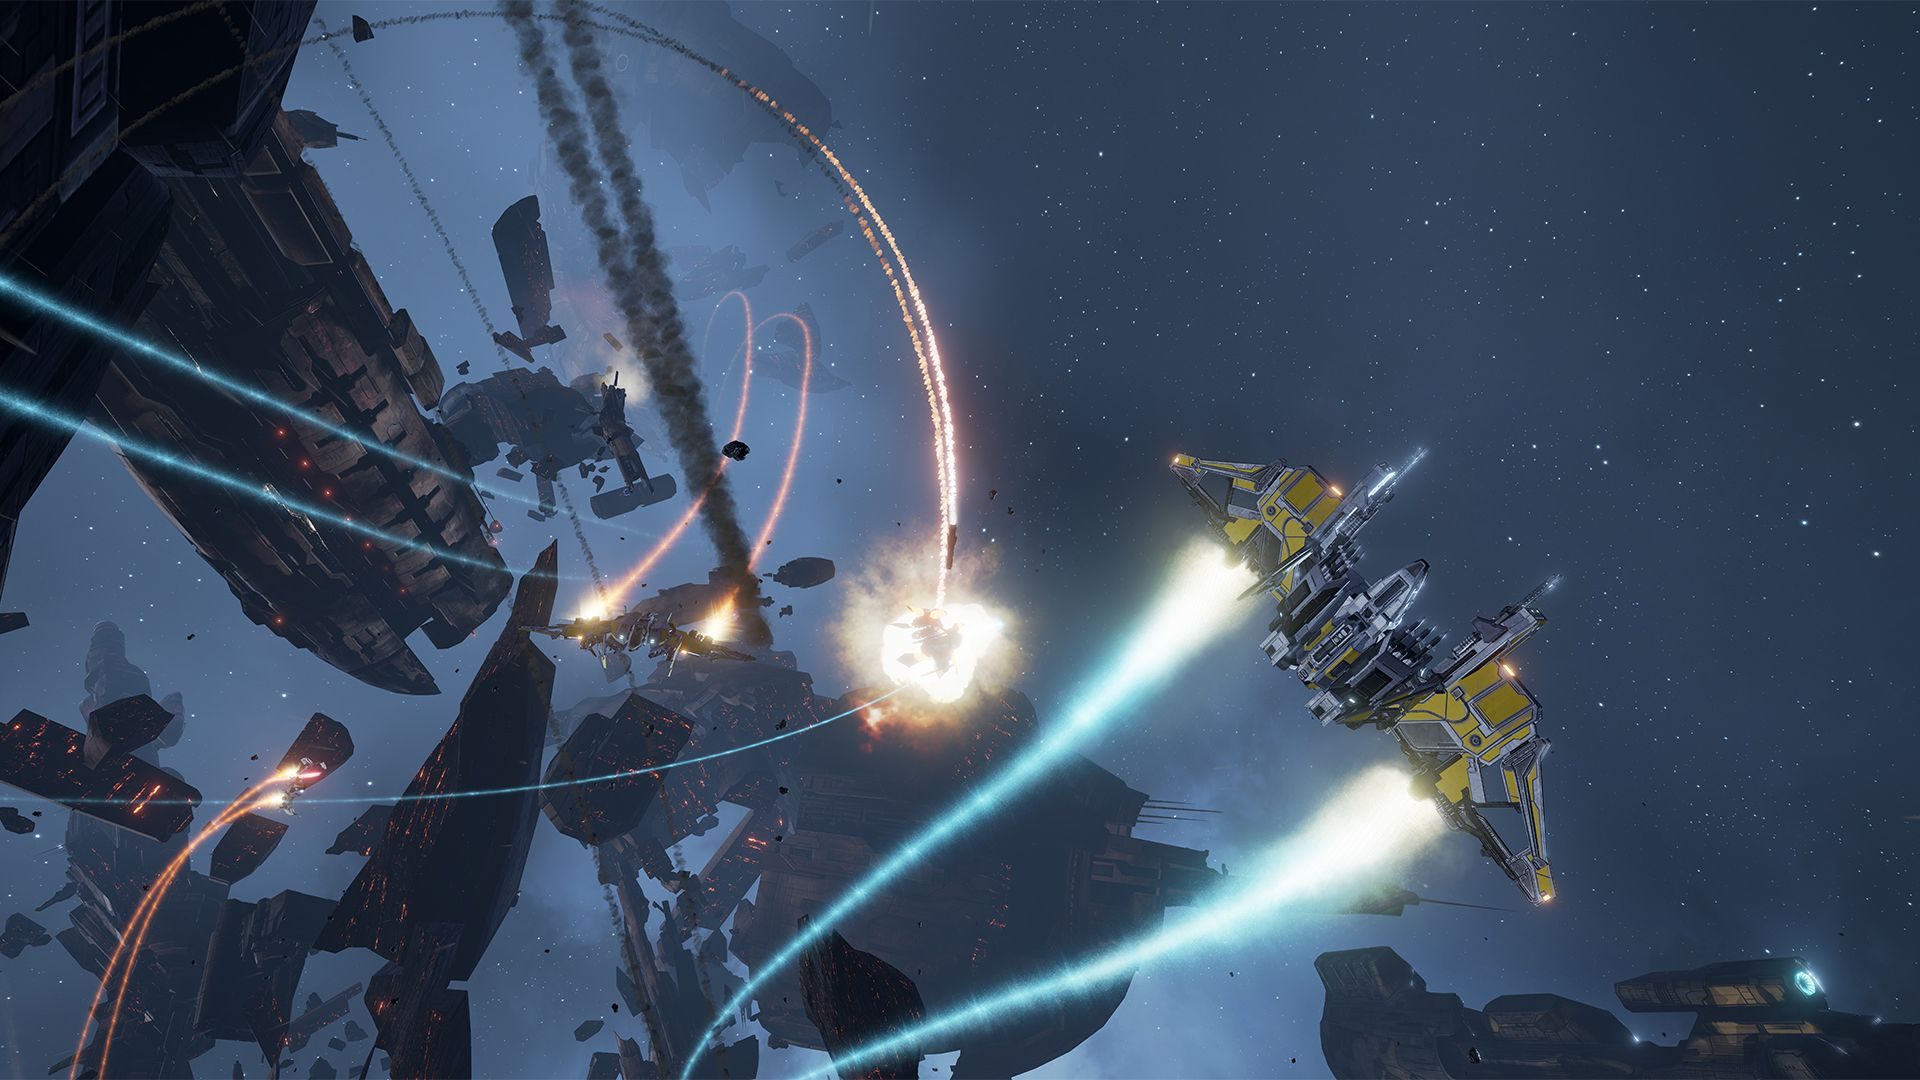 eve-valkyrie-will-ship-with-oculus-rift-at-launch